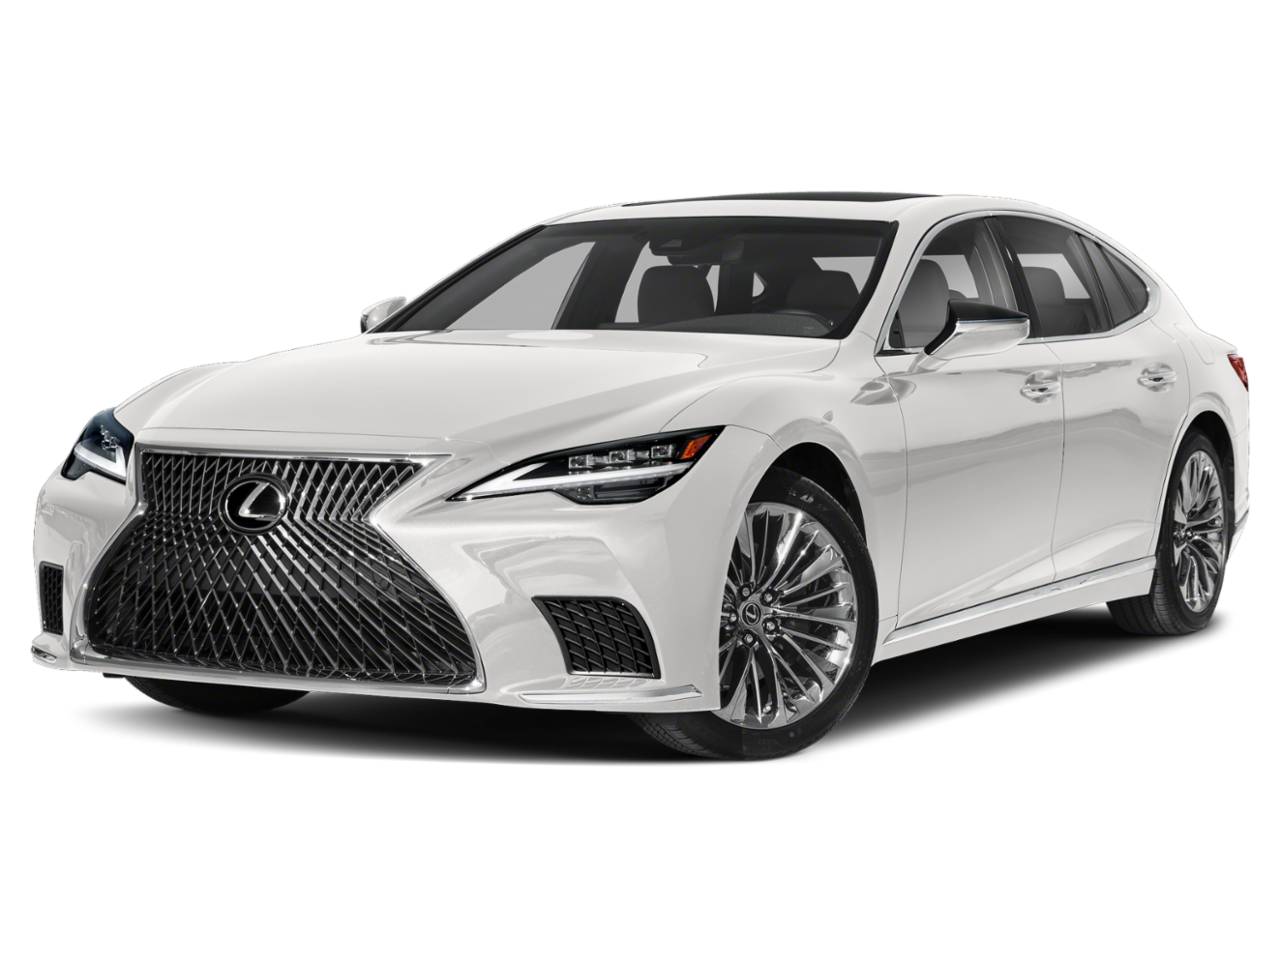 Sewell Lexus - Experience Lexus at Sewell Automotive Companies